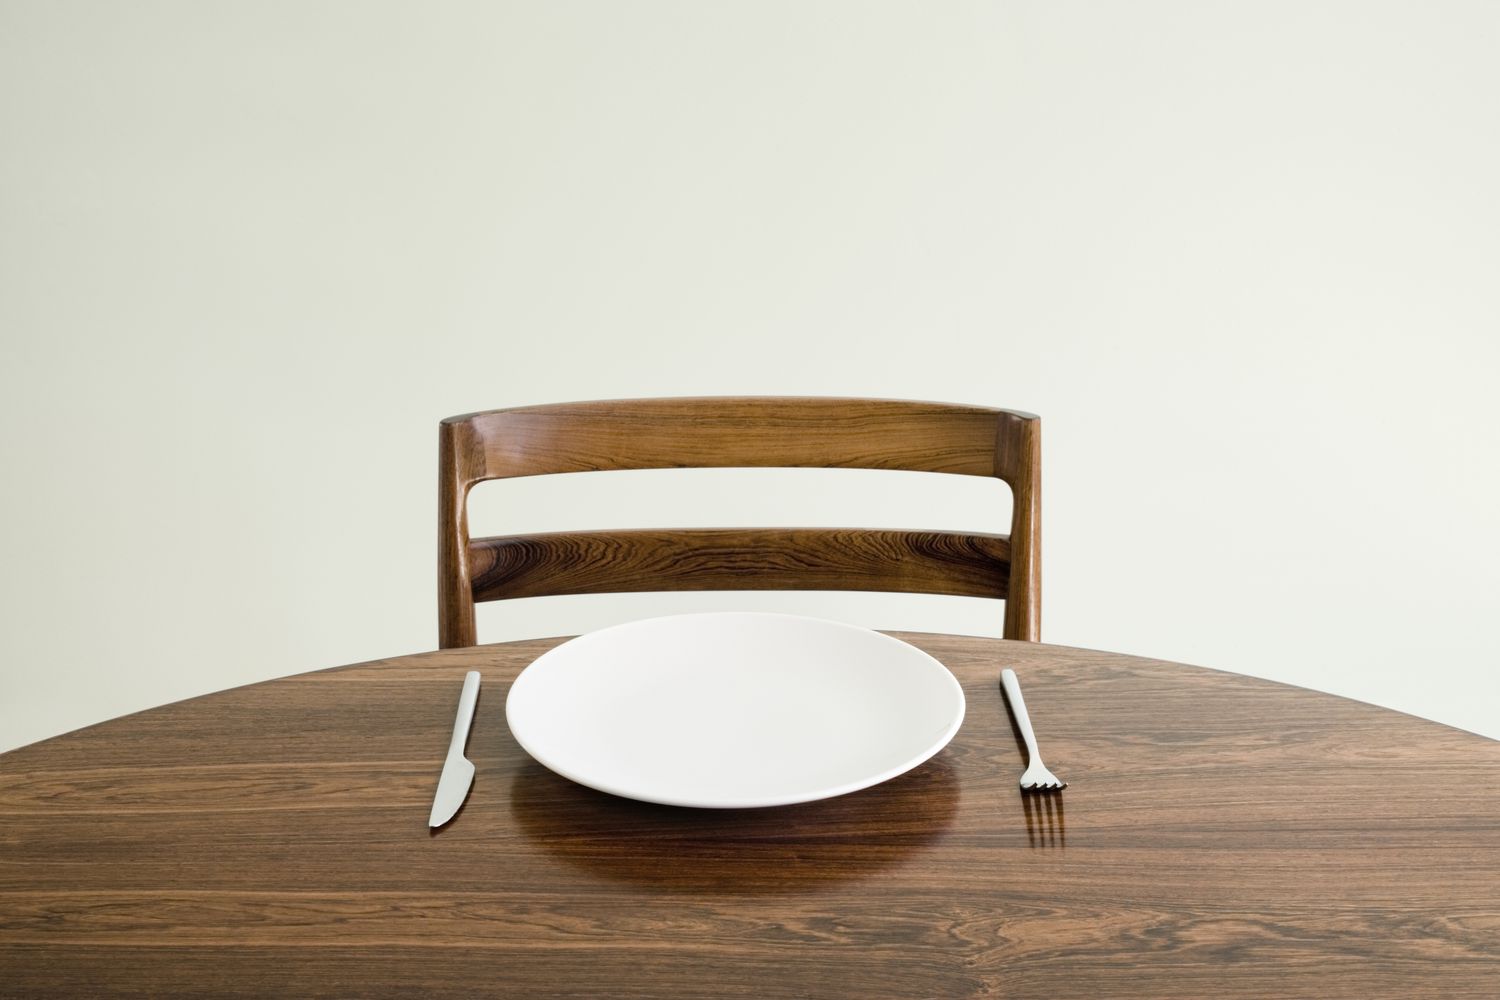 Empty plate with knife and fork on table.